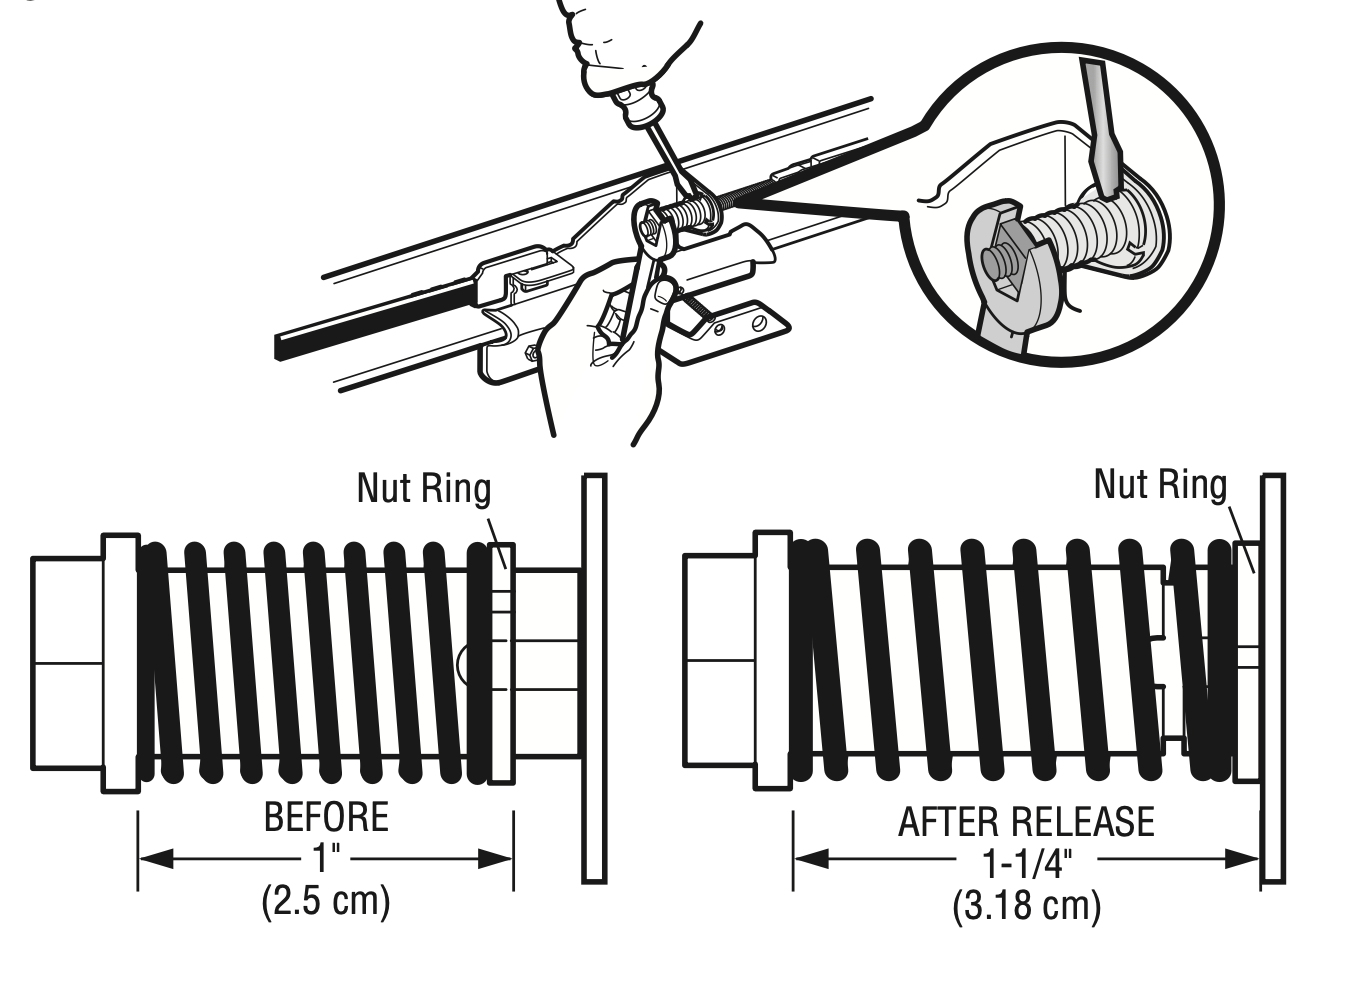 Releasing the spring trolley nut on a LiftMaster belt drive opener. Credit: LiftMaster Owner’s Manual